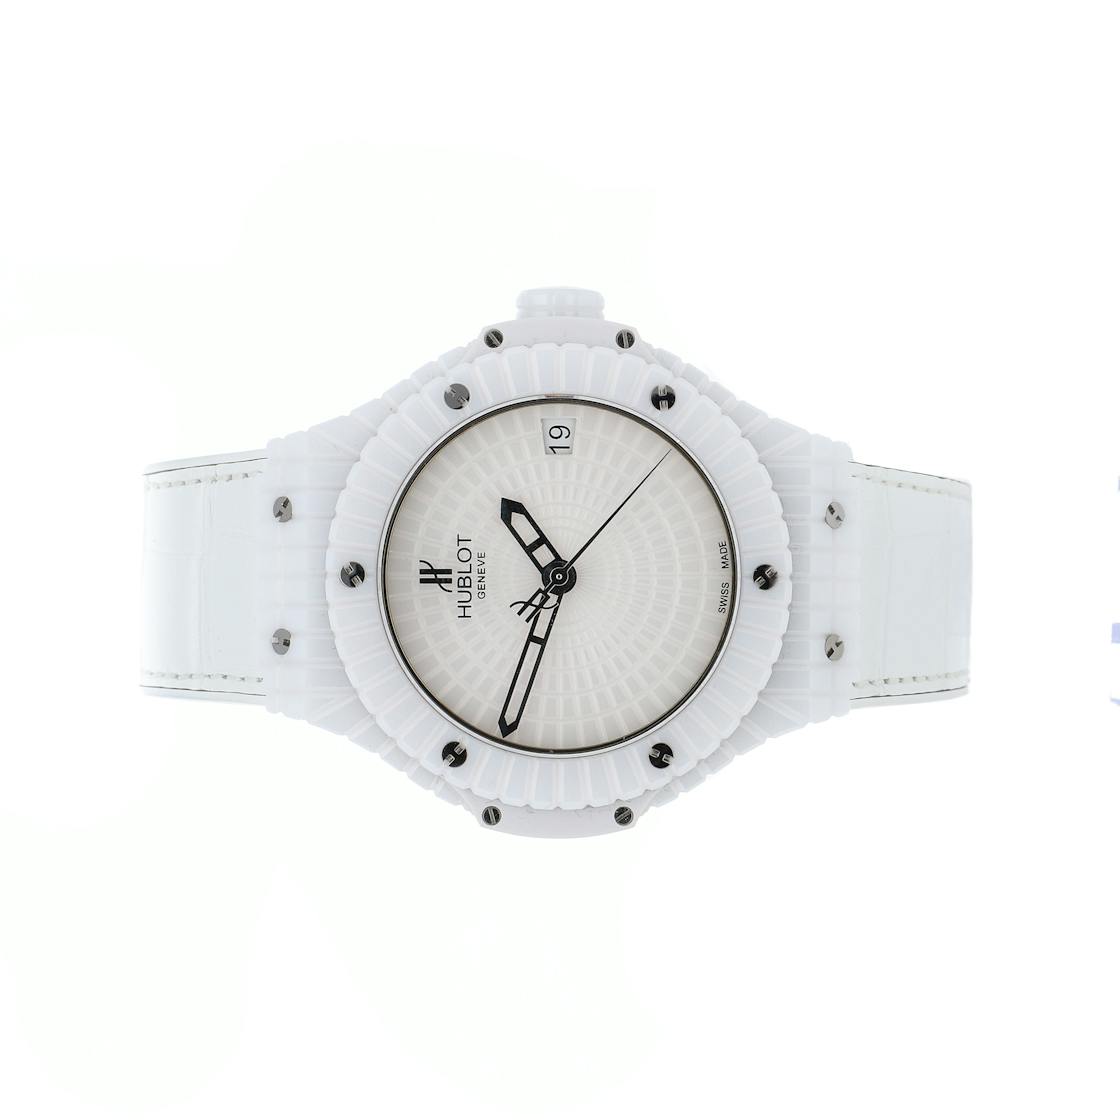 Hublot Big Bang Caviar White for $6,601 for sale from a Private Seller on  Chrono24